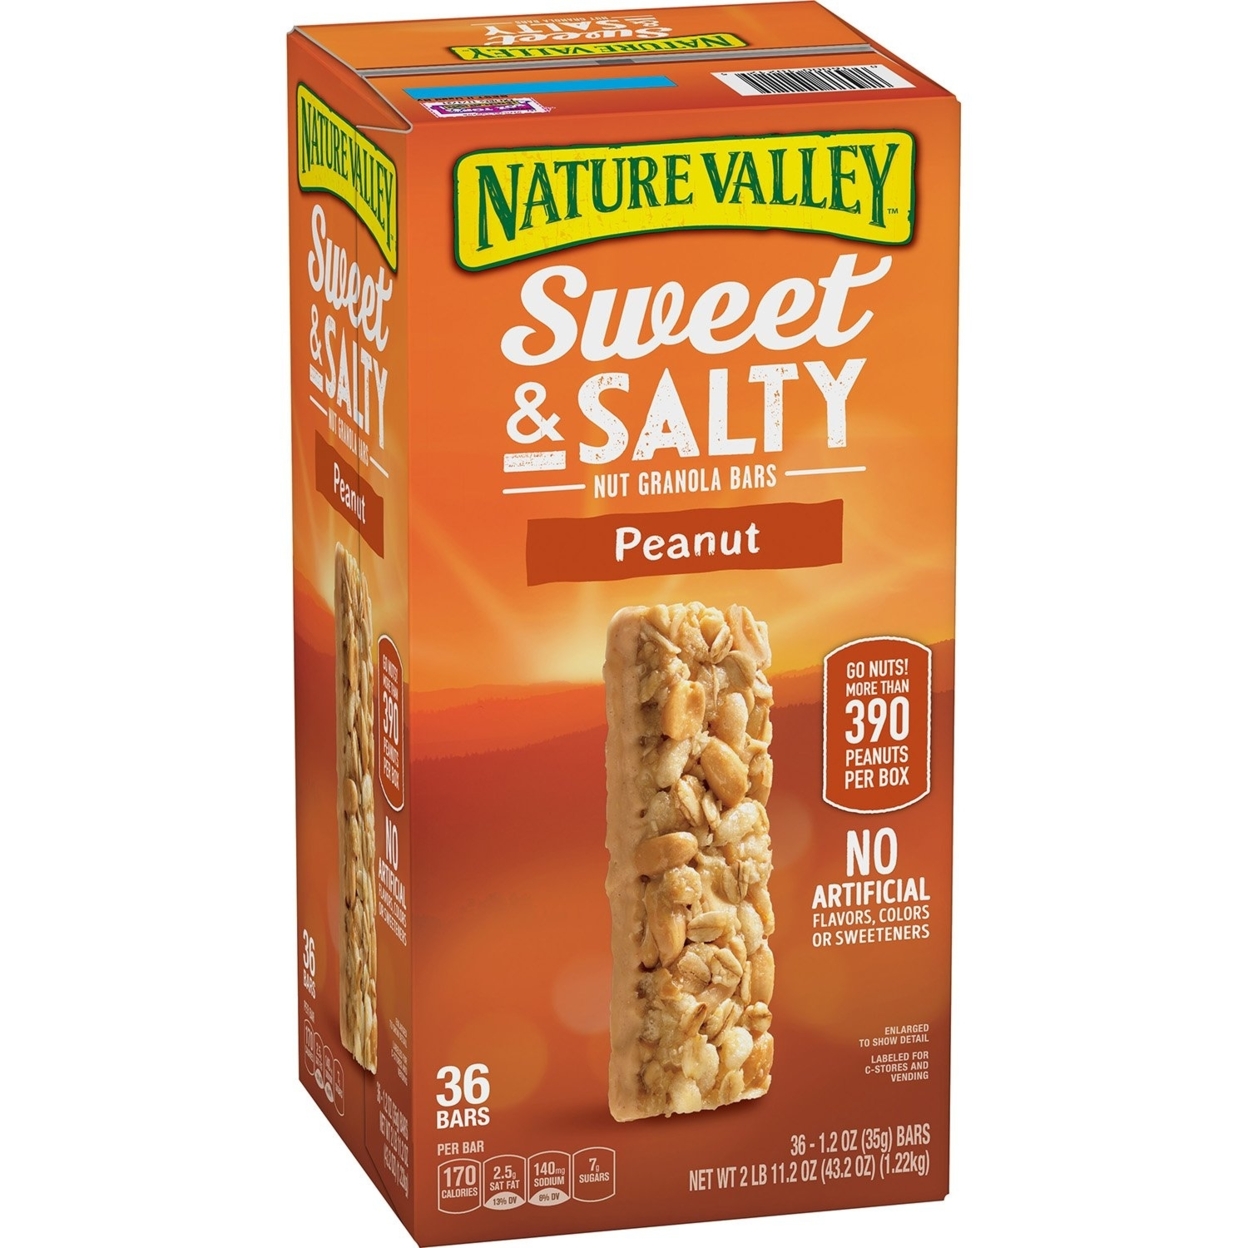 Nature Valley Sweet & Salty Peanut Granola Bars (1.2 Ounce Bars, 36 Count)